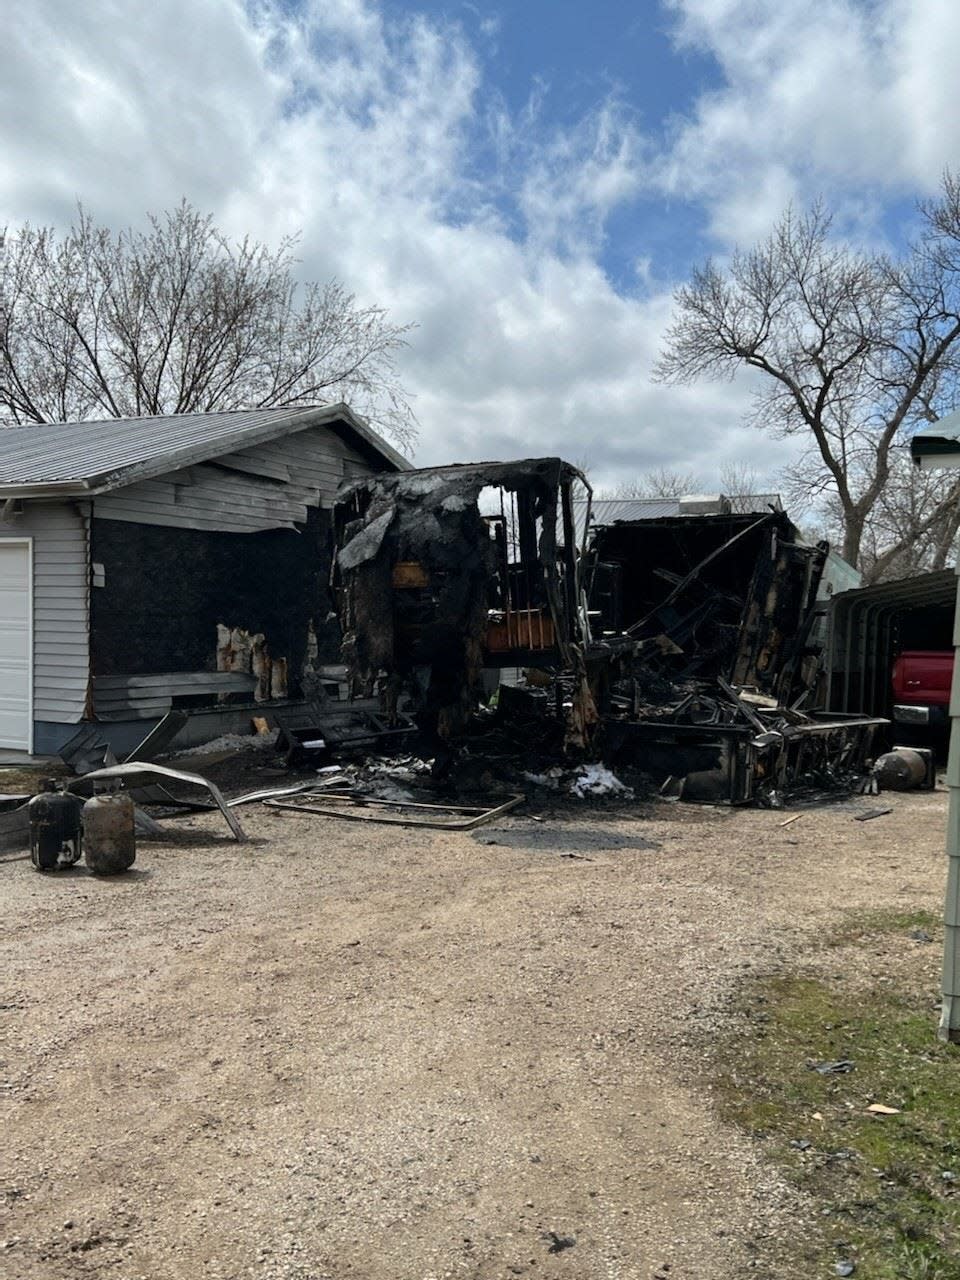 A camper was deemed a total loss after a fire on Monday afternoon.